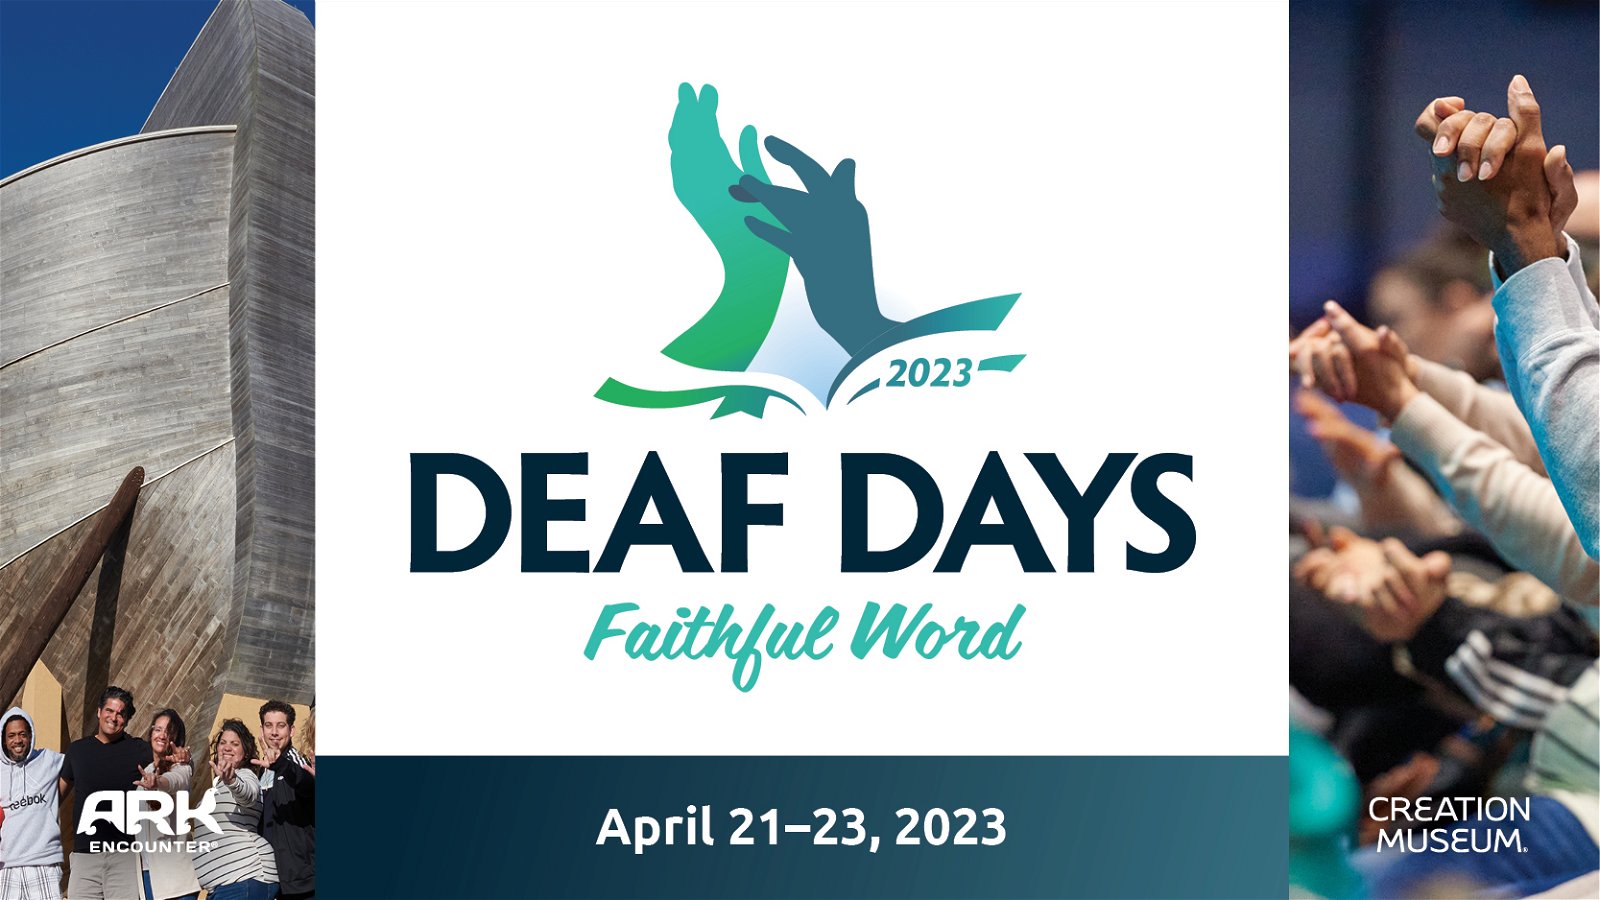 Creation Museum to Host Annual Deaf Days in April